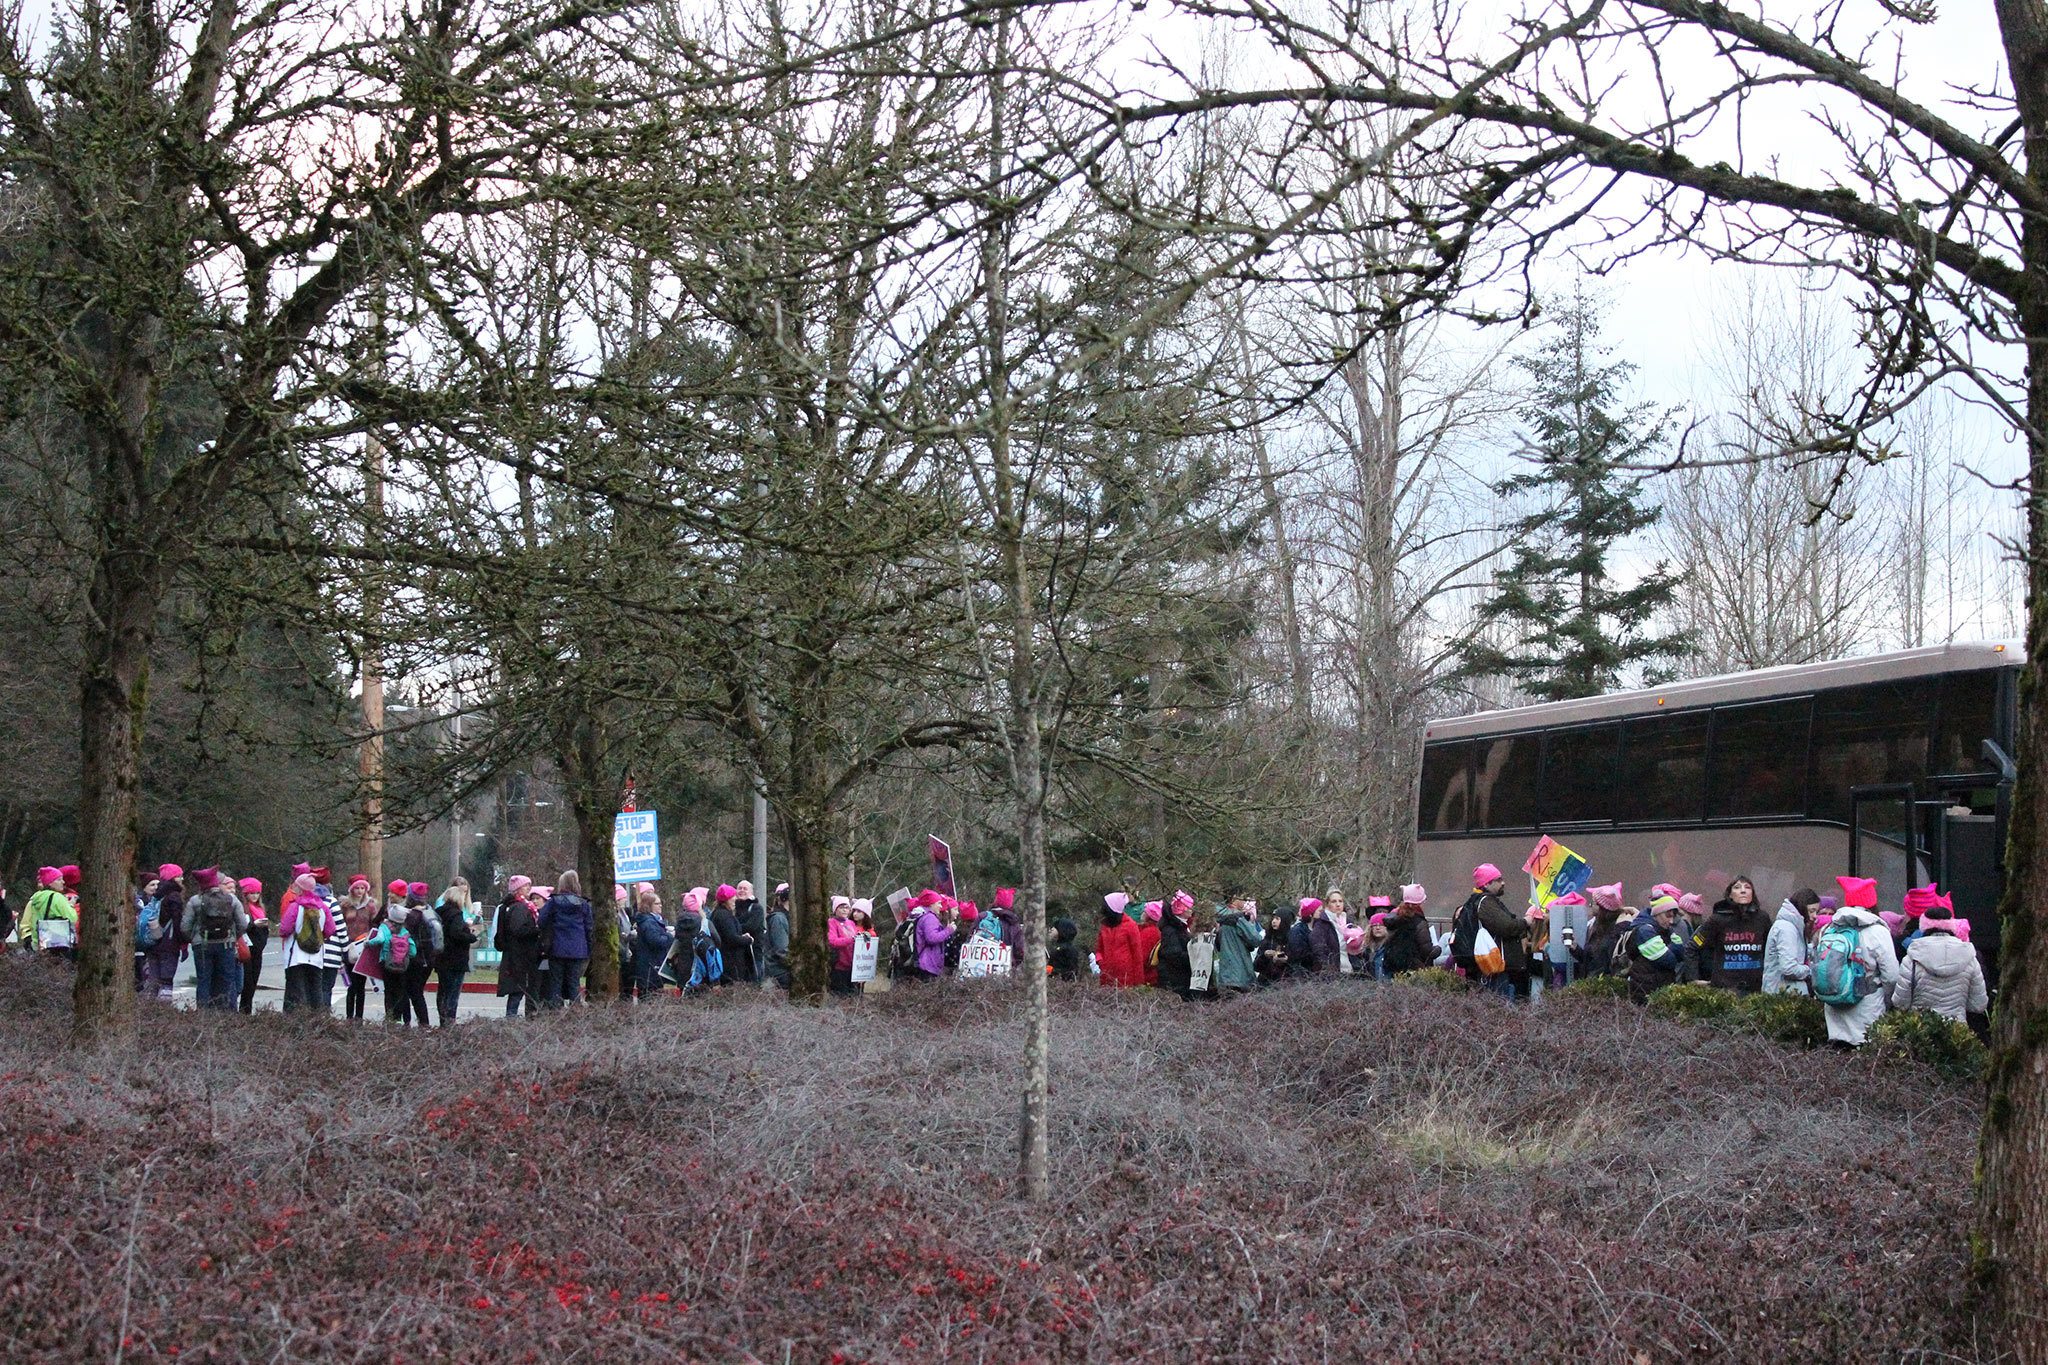 Eastside residents line up to board a charter bus to the Women’s March in Seattle from the South Bellevue Park and Ride (Allison DeAngelis/staff photo).